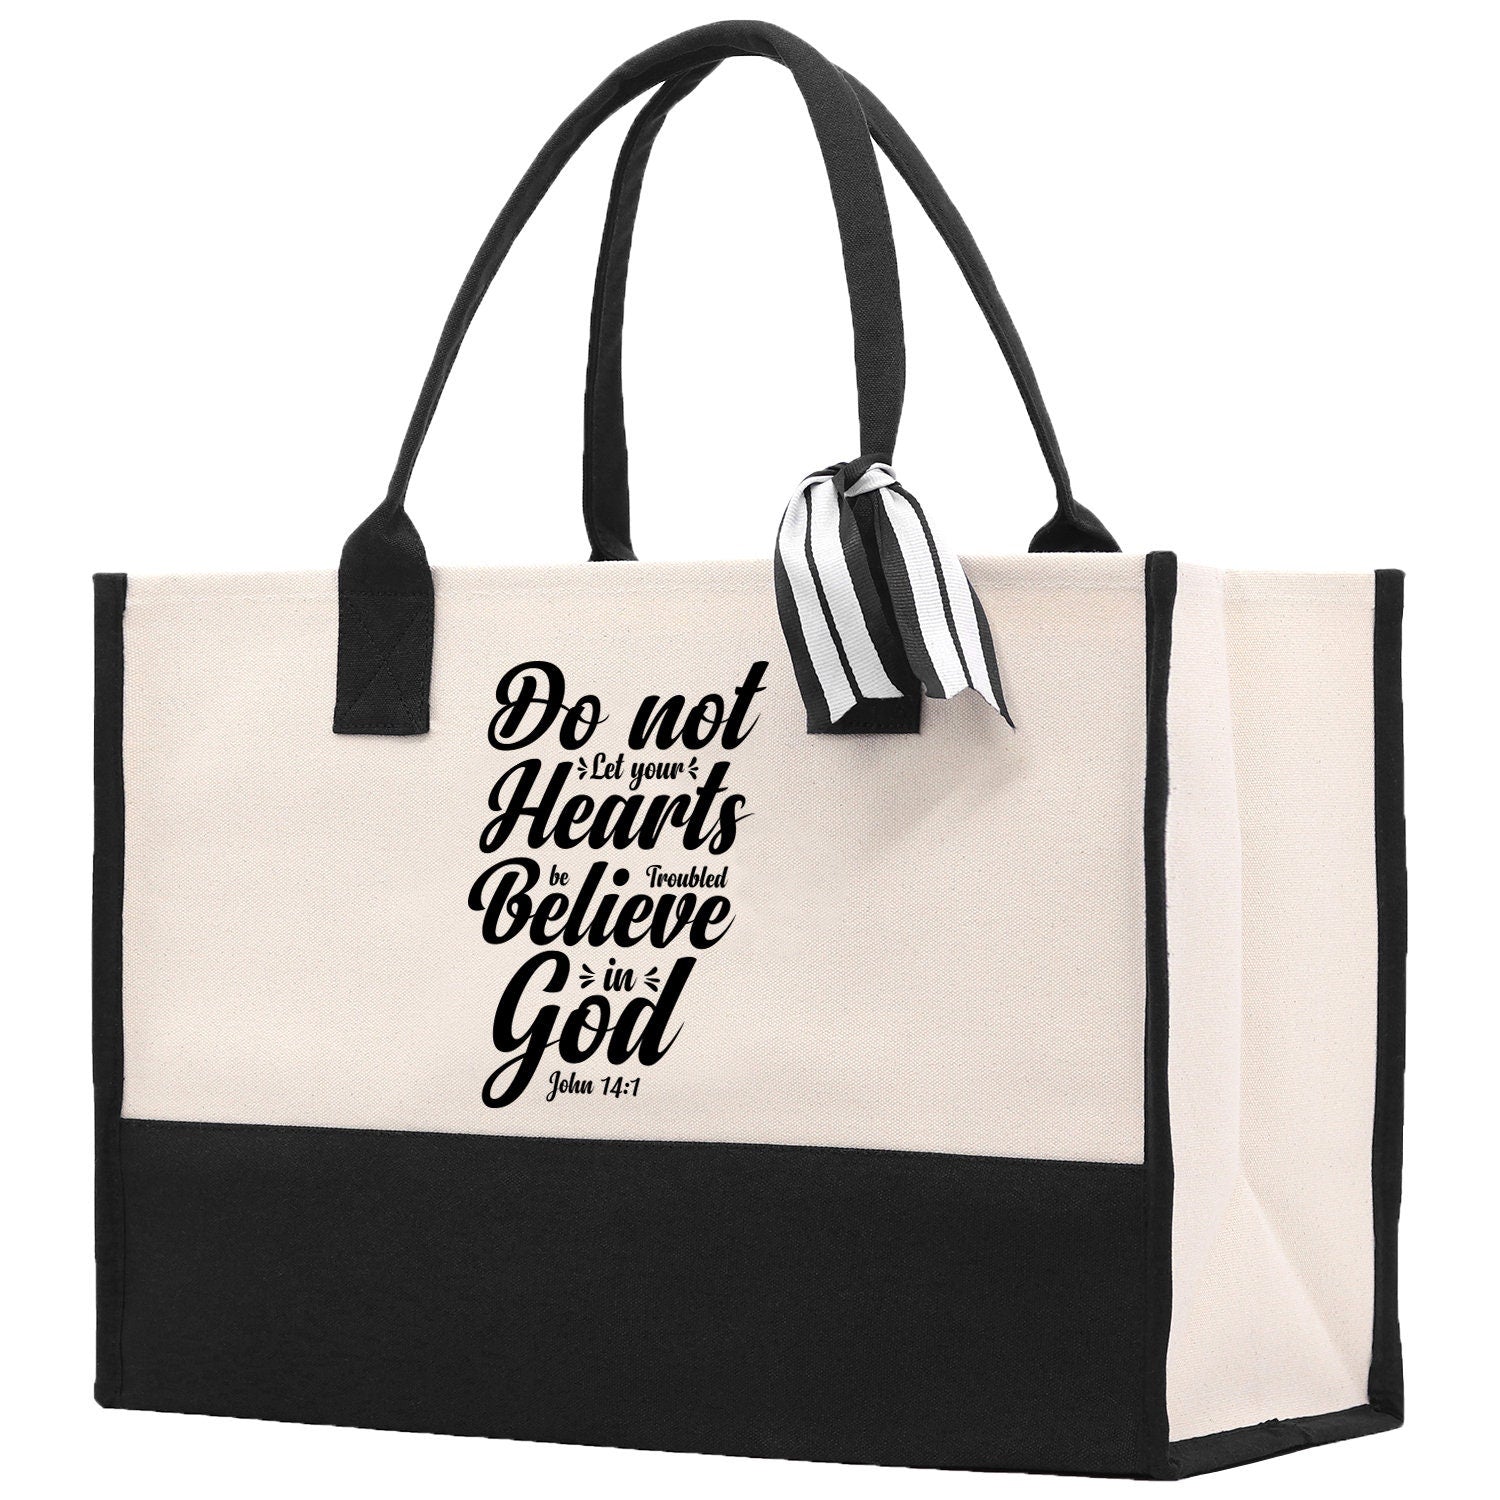 Do not Let Your heart Be Troubled Believe in God John 14:1 Religious Canvas Tote Bag Gift for Women Bible Verse Gift Church Tote Bag